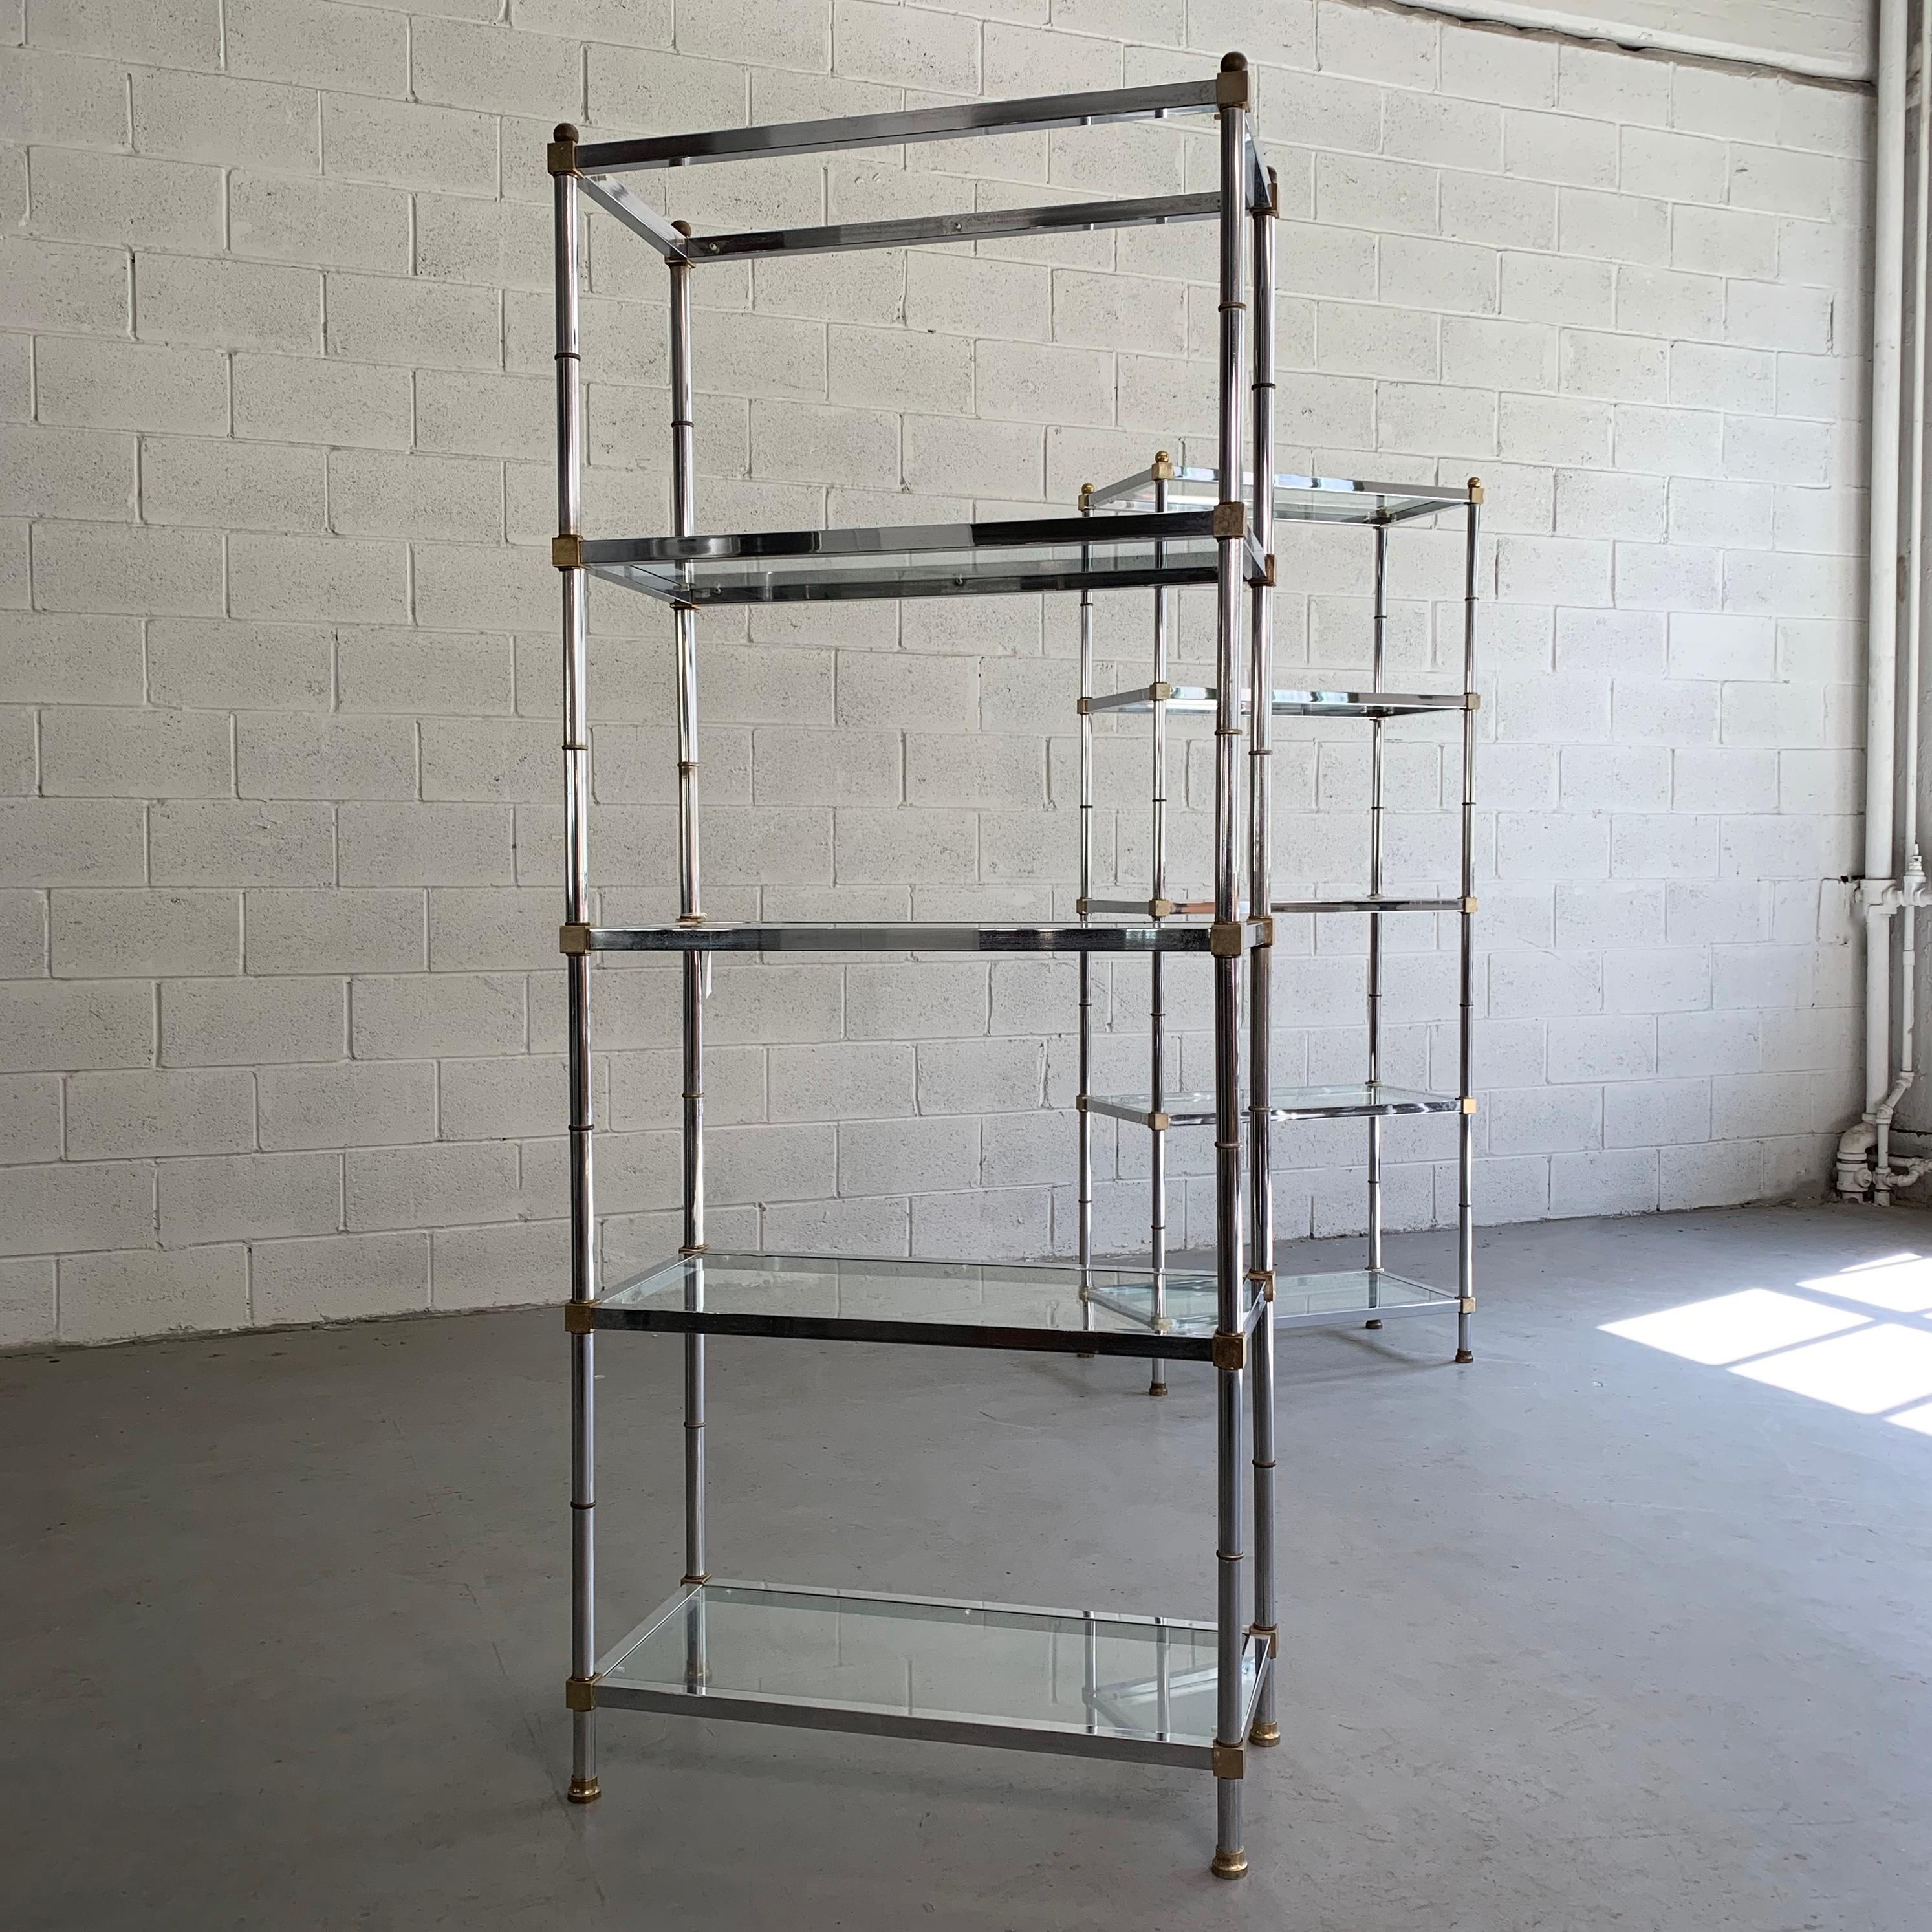 Pair of Mid-Century Modern, open shelving, étagères feature chrome frames with brass accents and glass shelves that are spaced 16 inches apart.